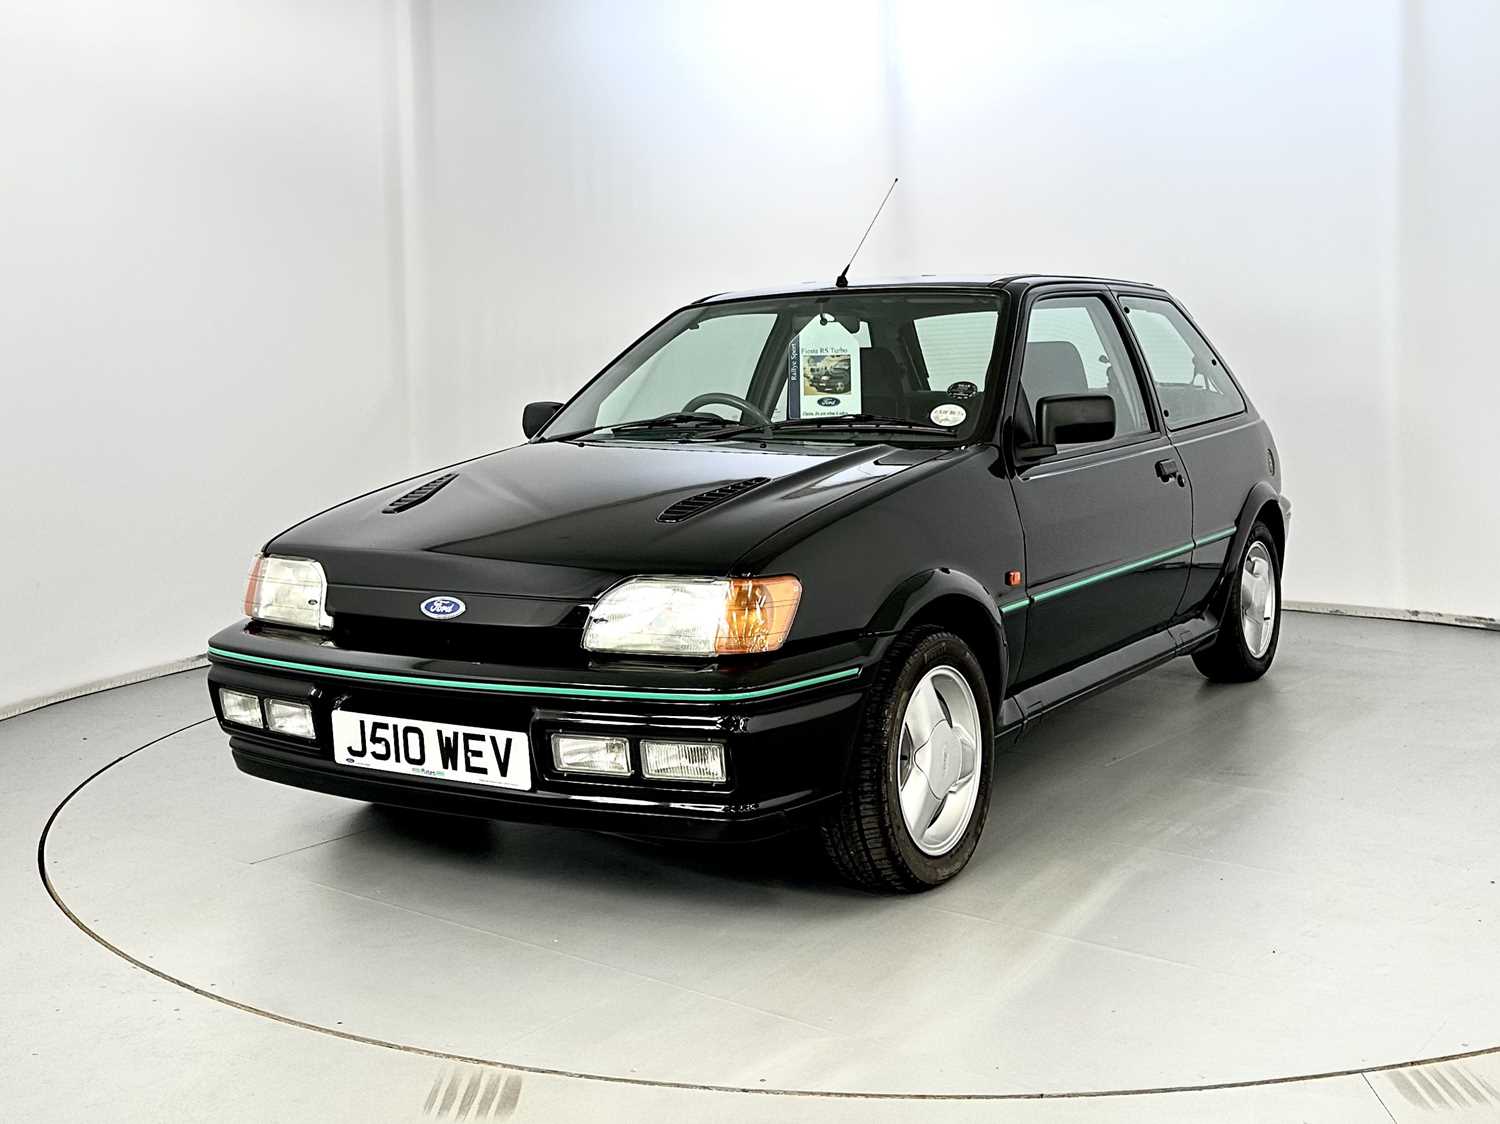 1991 Ford Fiesta RS Turbo Spectacular Original Condition  - Image 3 of 40